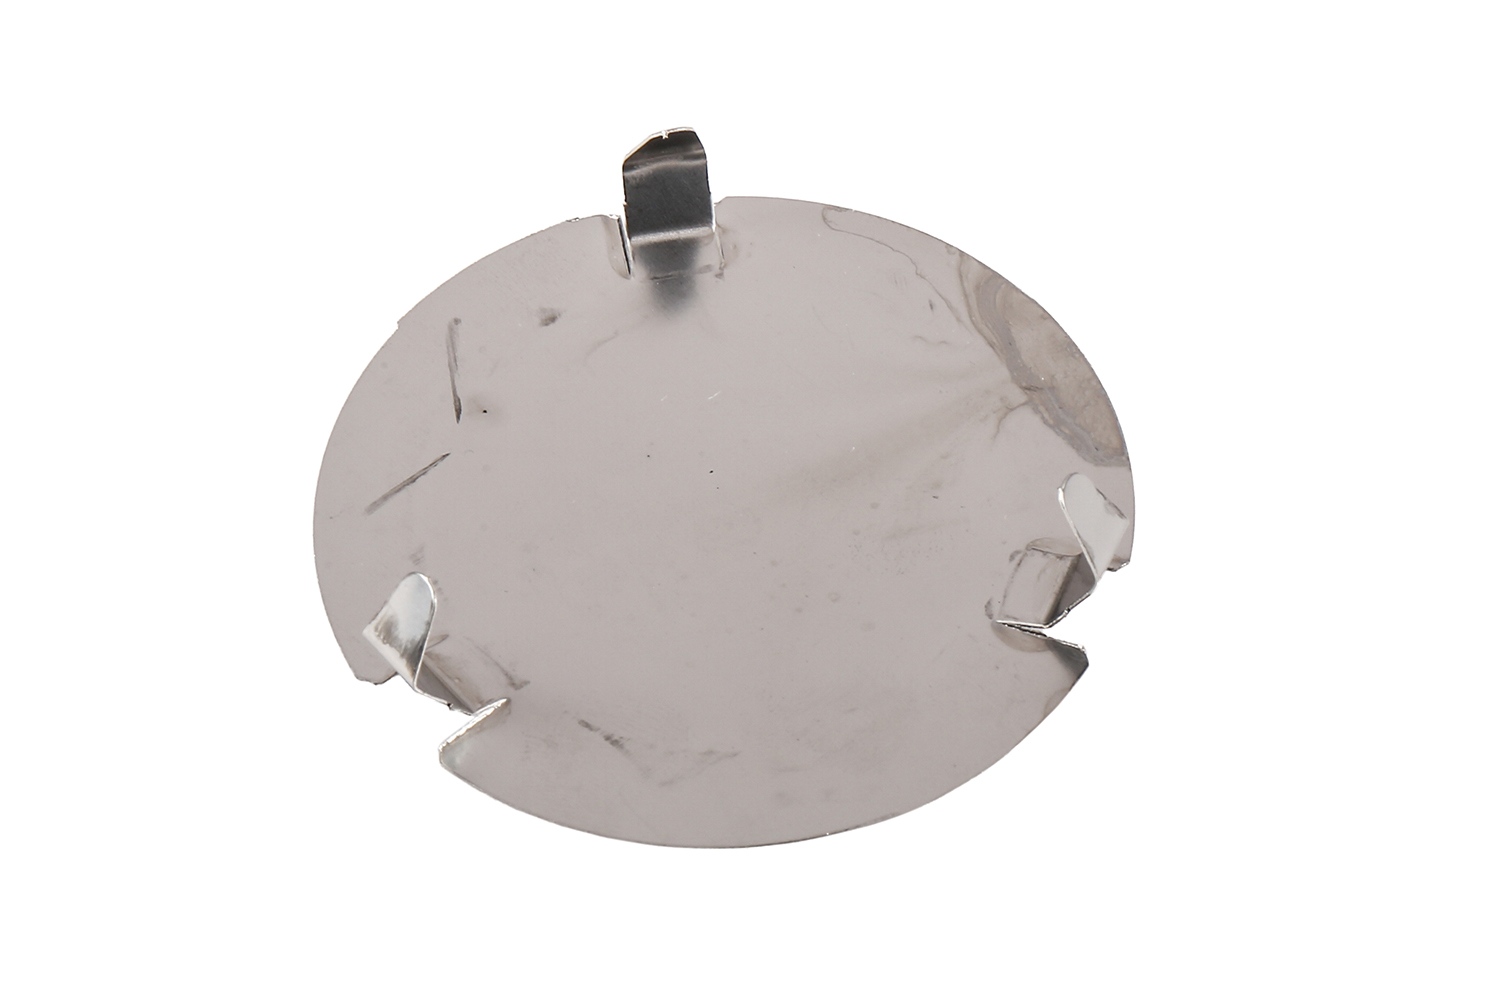 GM GENUINE PARTS - Transmission Bell Housing Inspection Cover - GMP 24205900